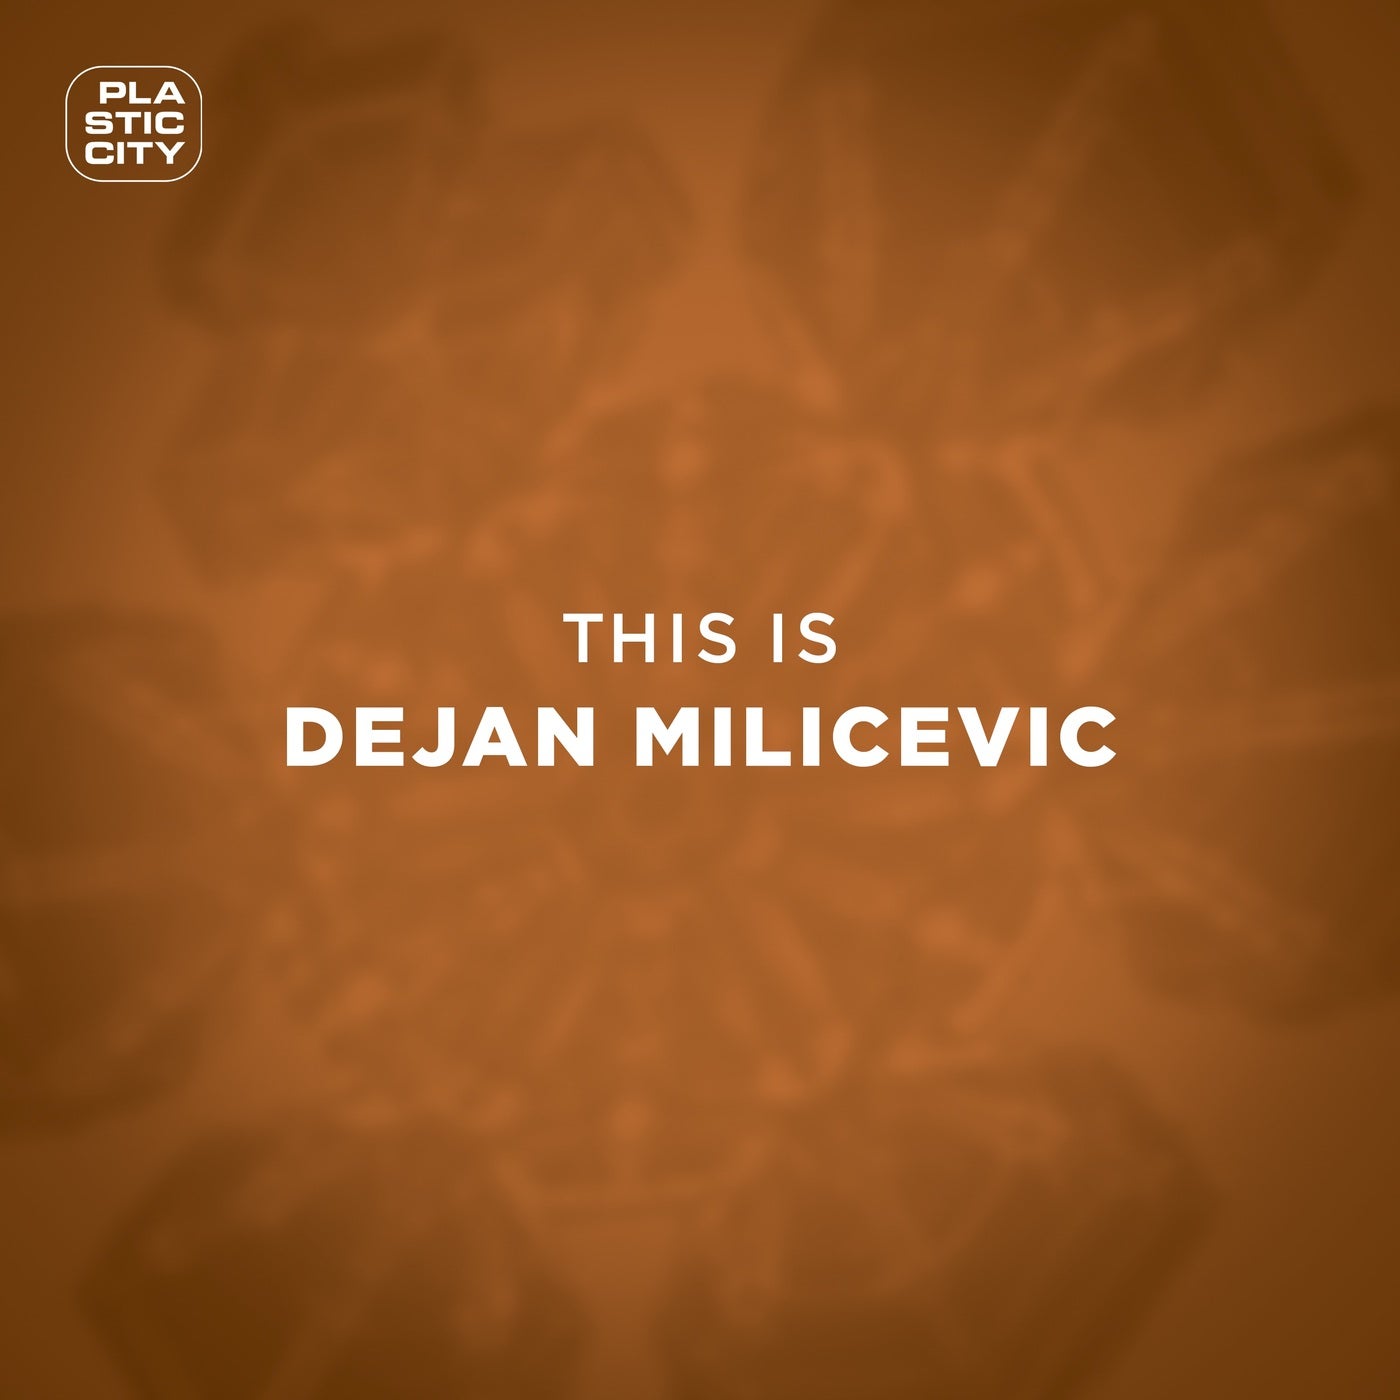 This is Dejan Milicevic